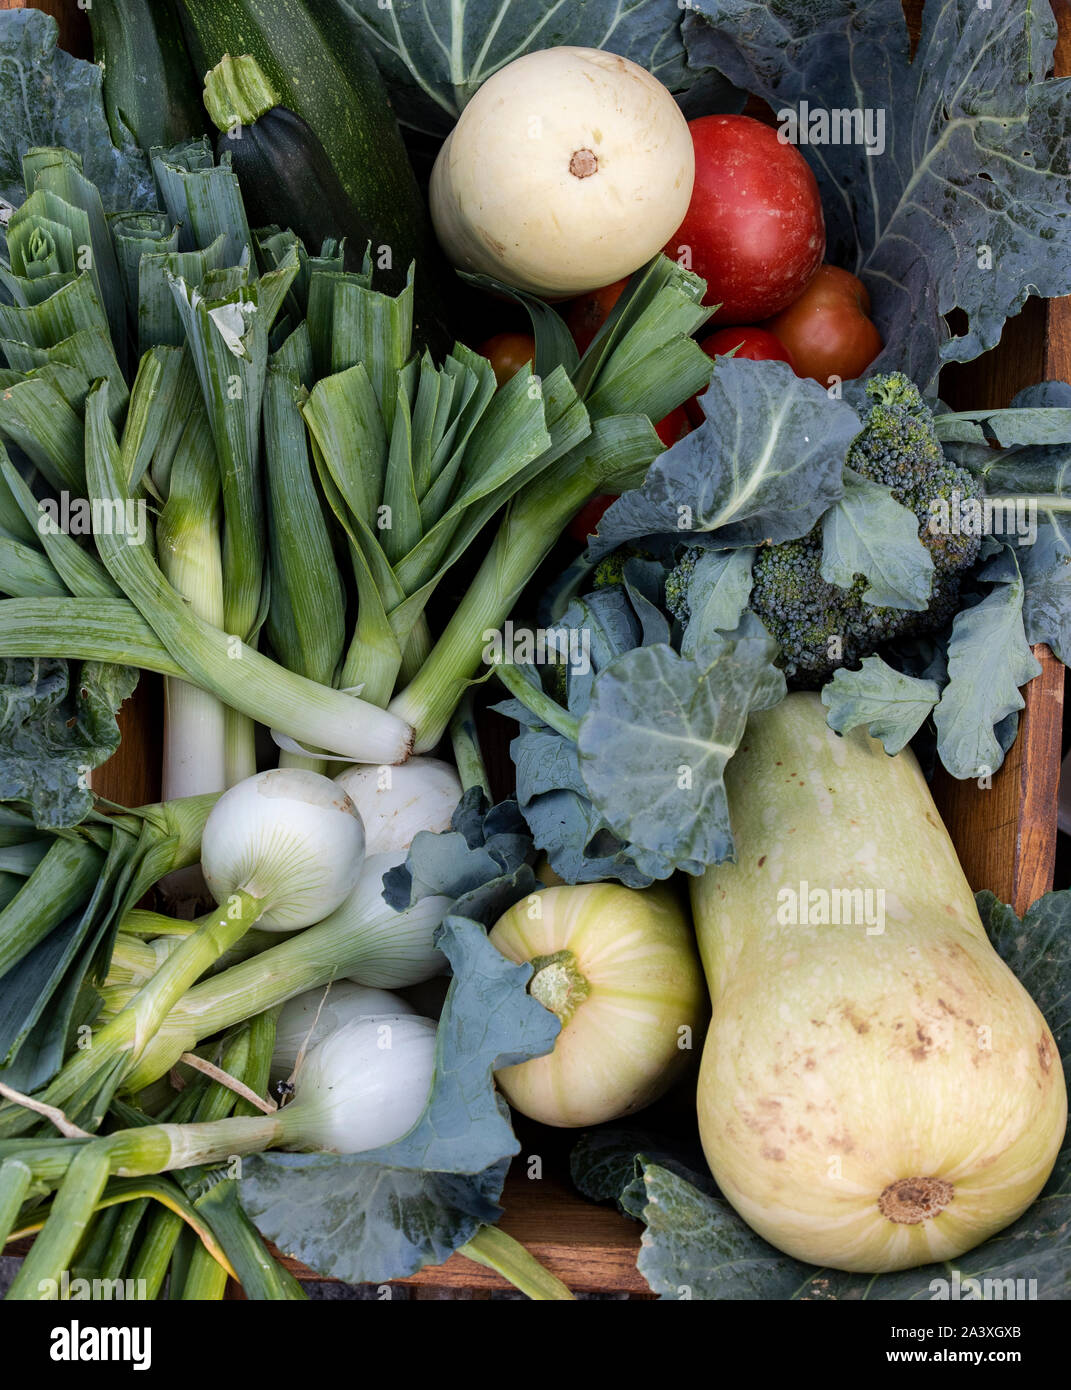 Vegetables in the local organic products market Stock Photo